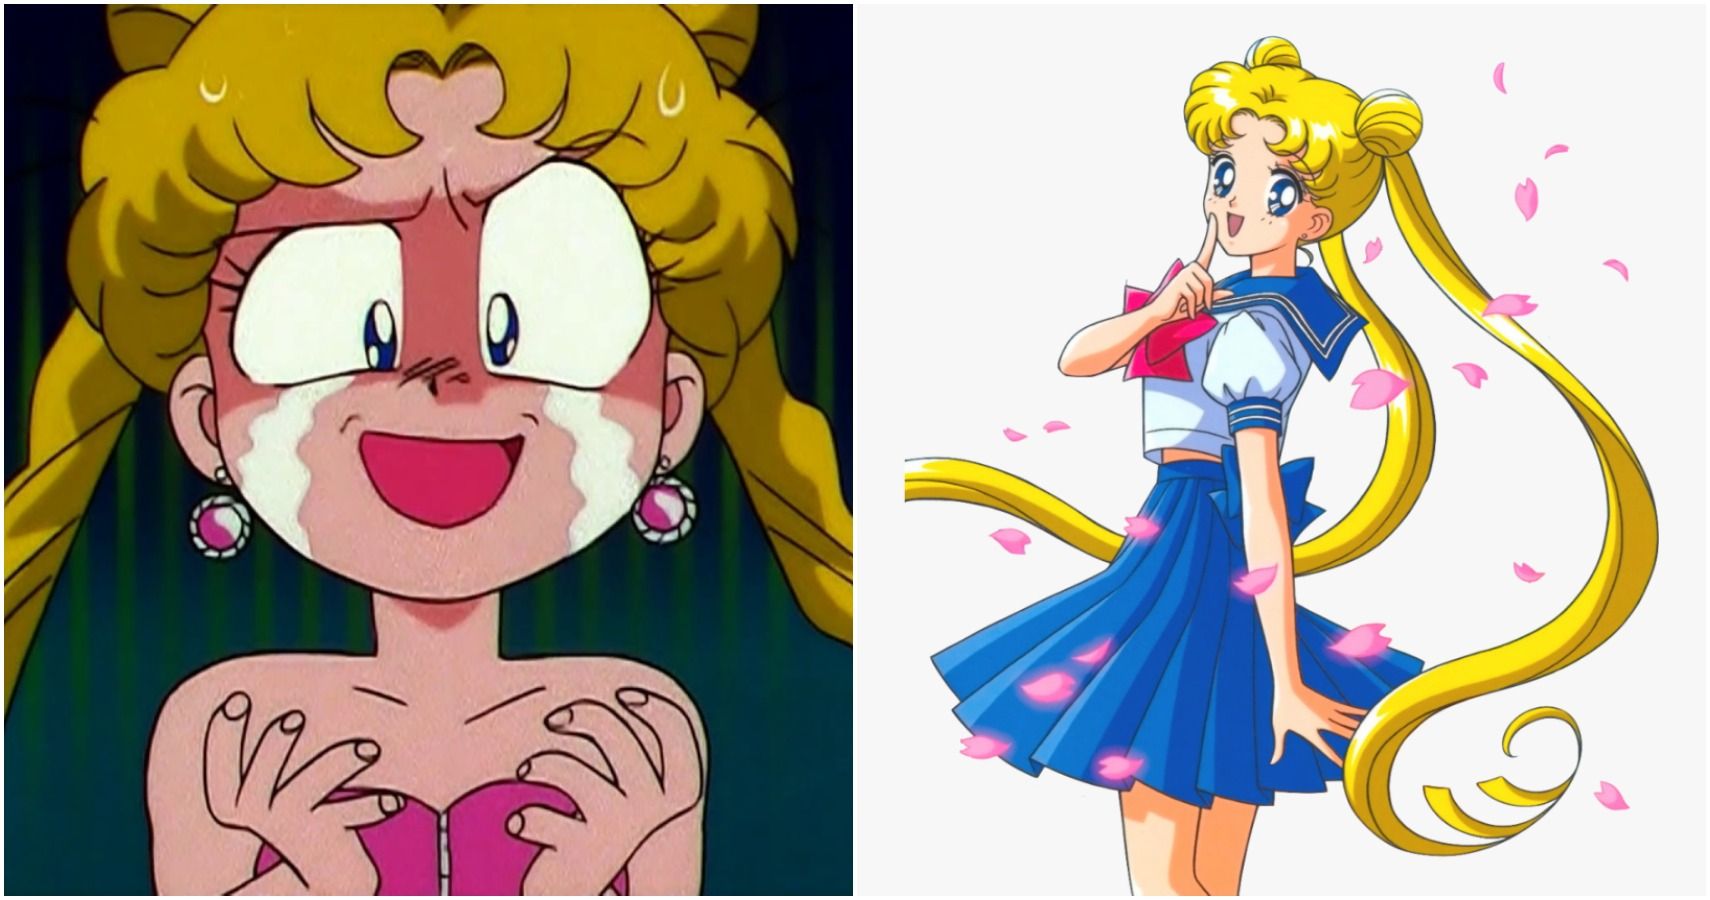 Usagi tsukino from Sailor Moon, two images: 1) crying cartoonishly, 1) smiling in her school uniform with sakura blossoms